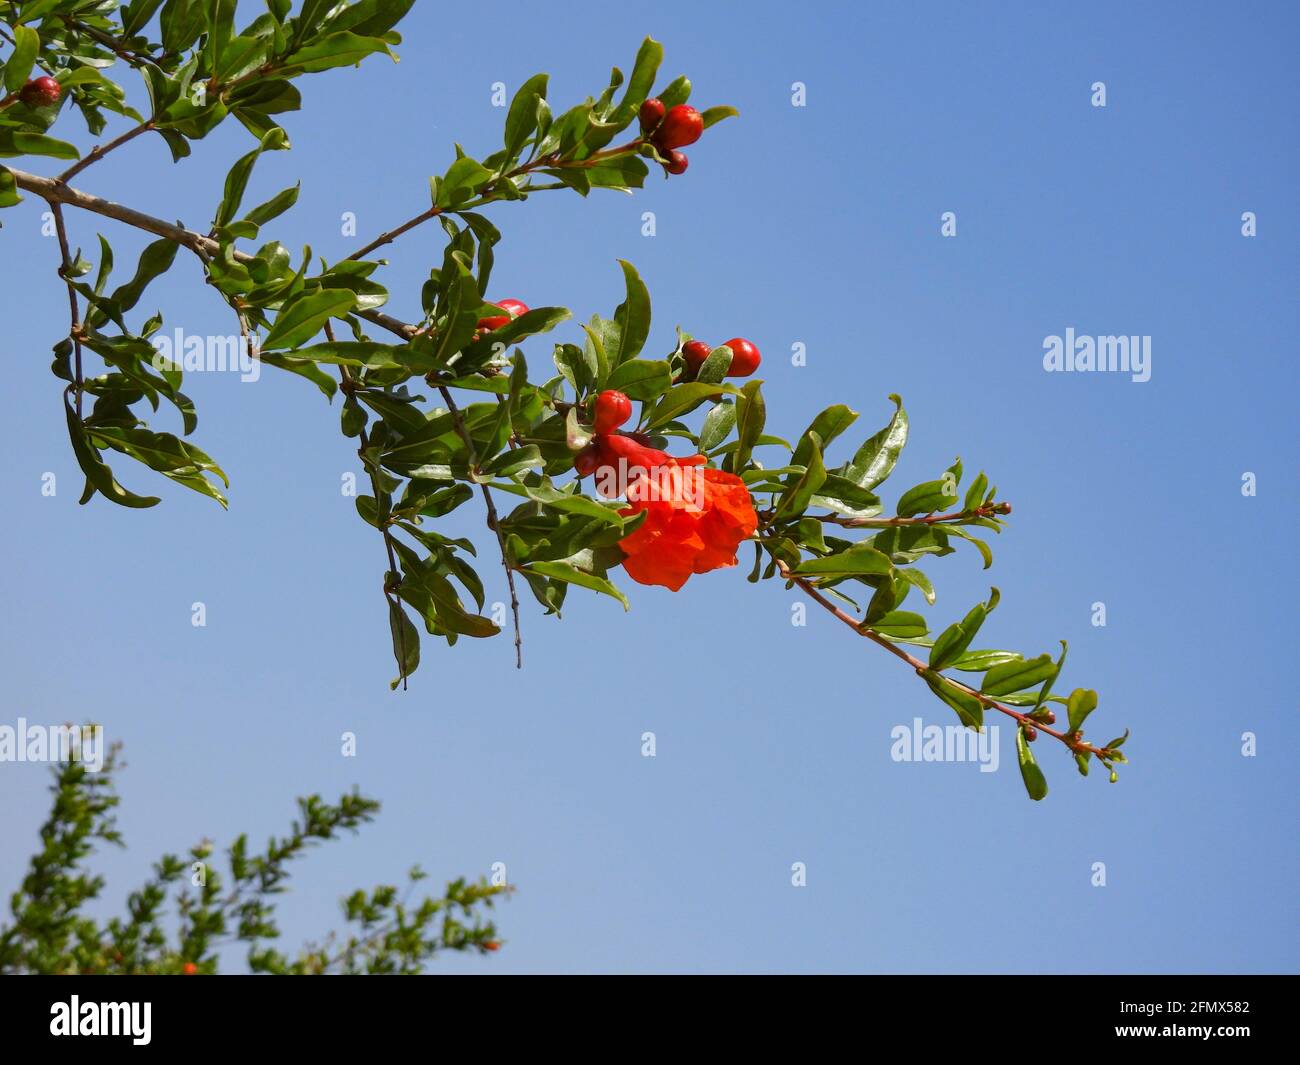 Branch with flowers and ovary of fruit of a pomegranate tree closeup against a background of green foliage and blue sky Stock Photo